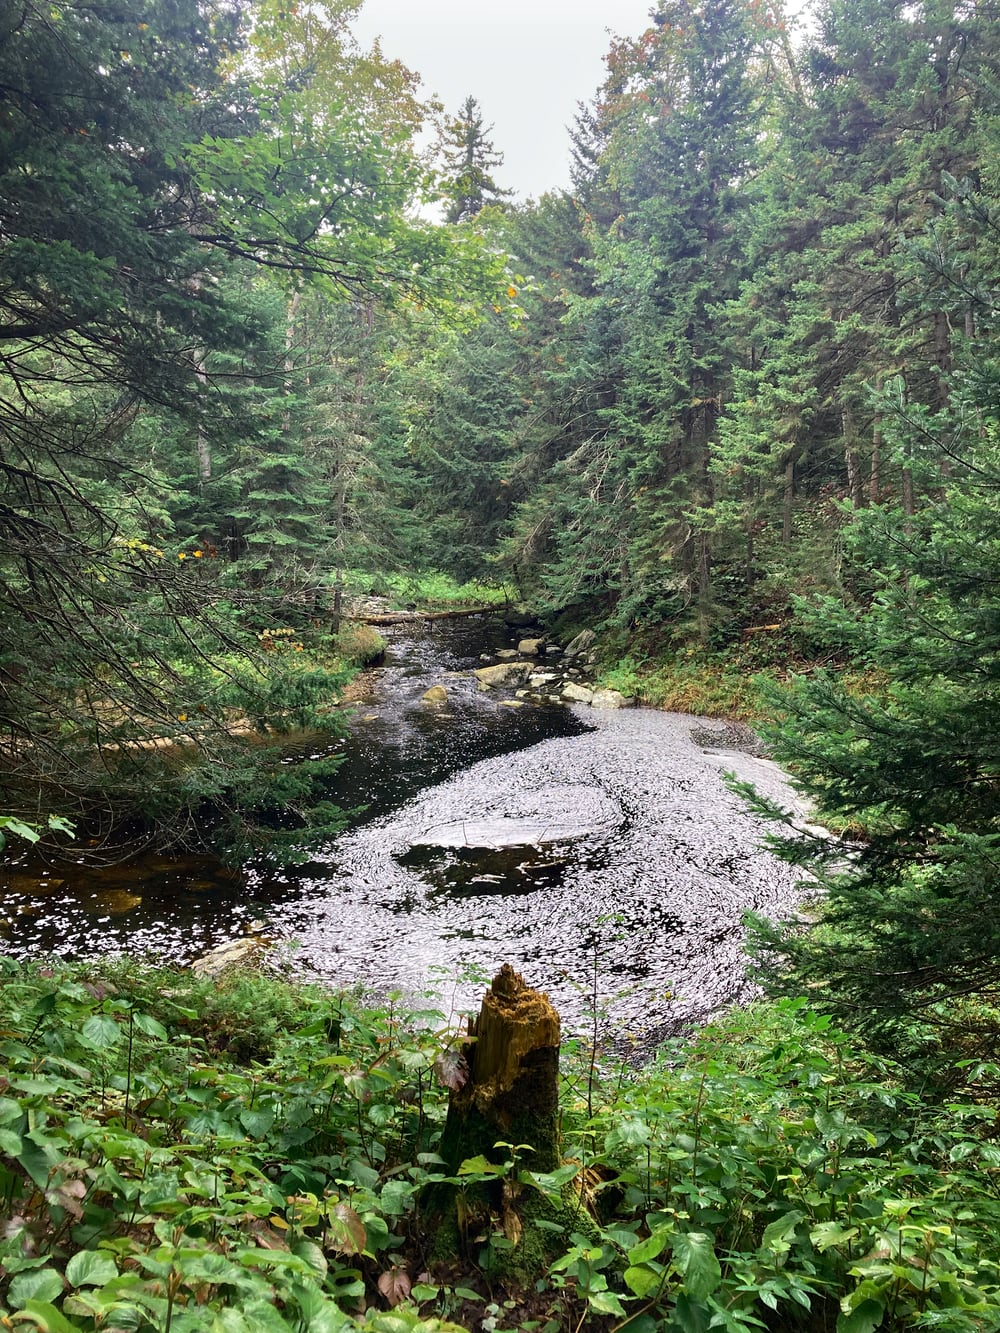 Photograph of a stream